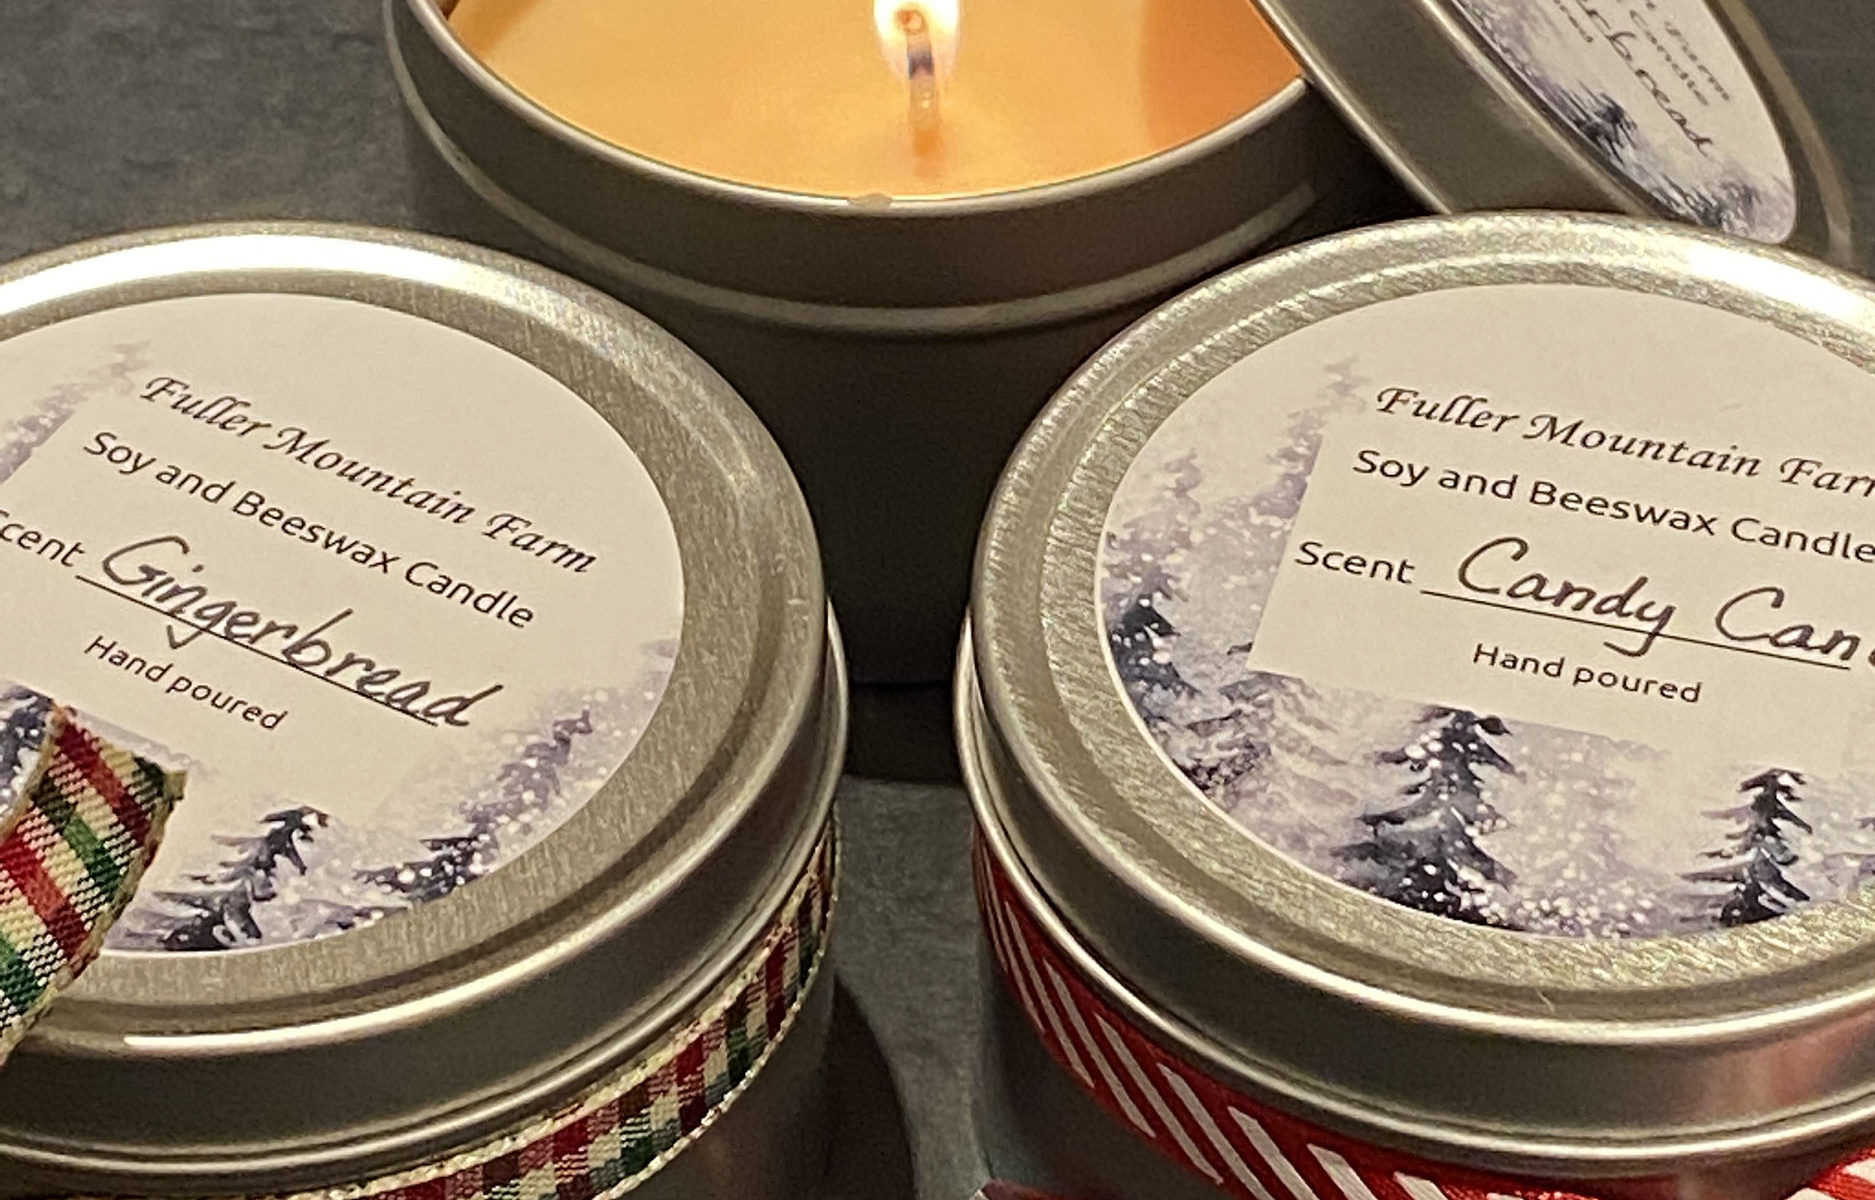 Hand poured Beeswax and Soy Candles – Fuller Mountain Farm